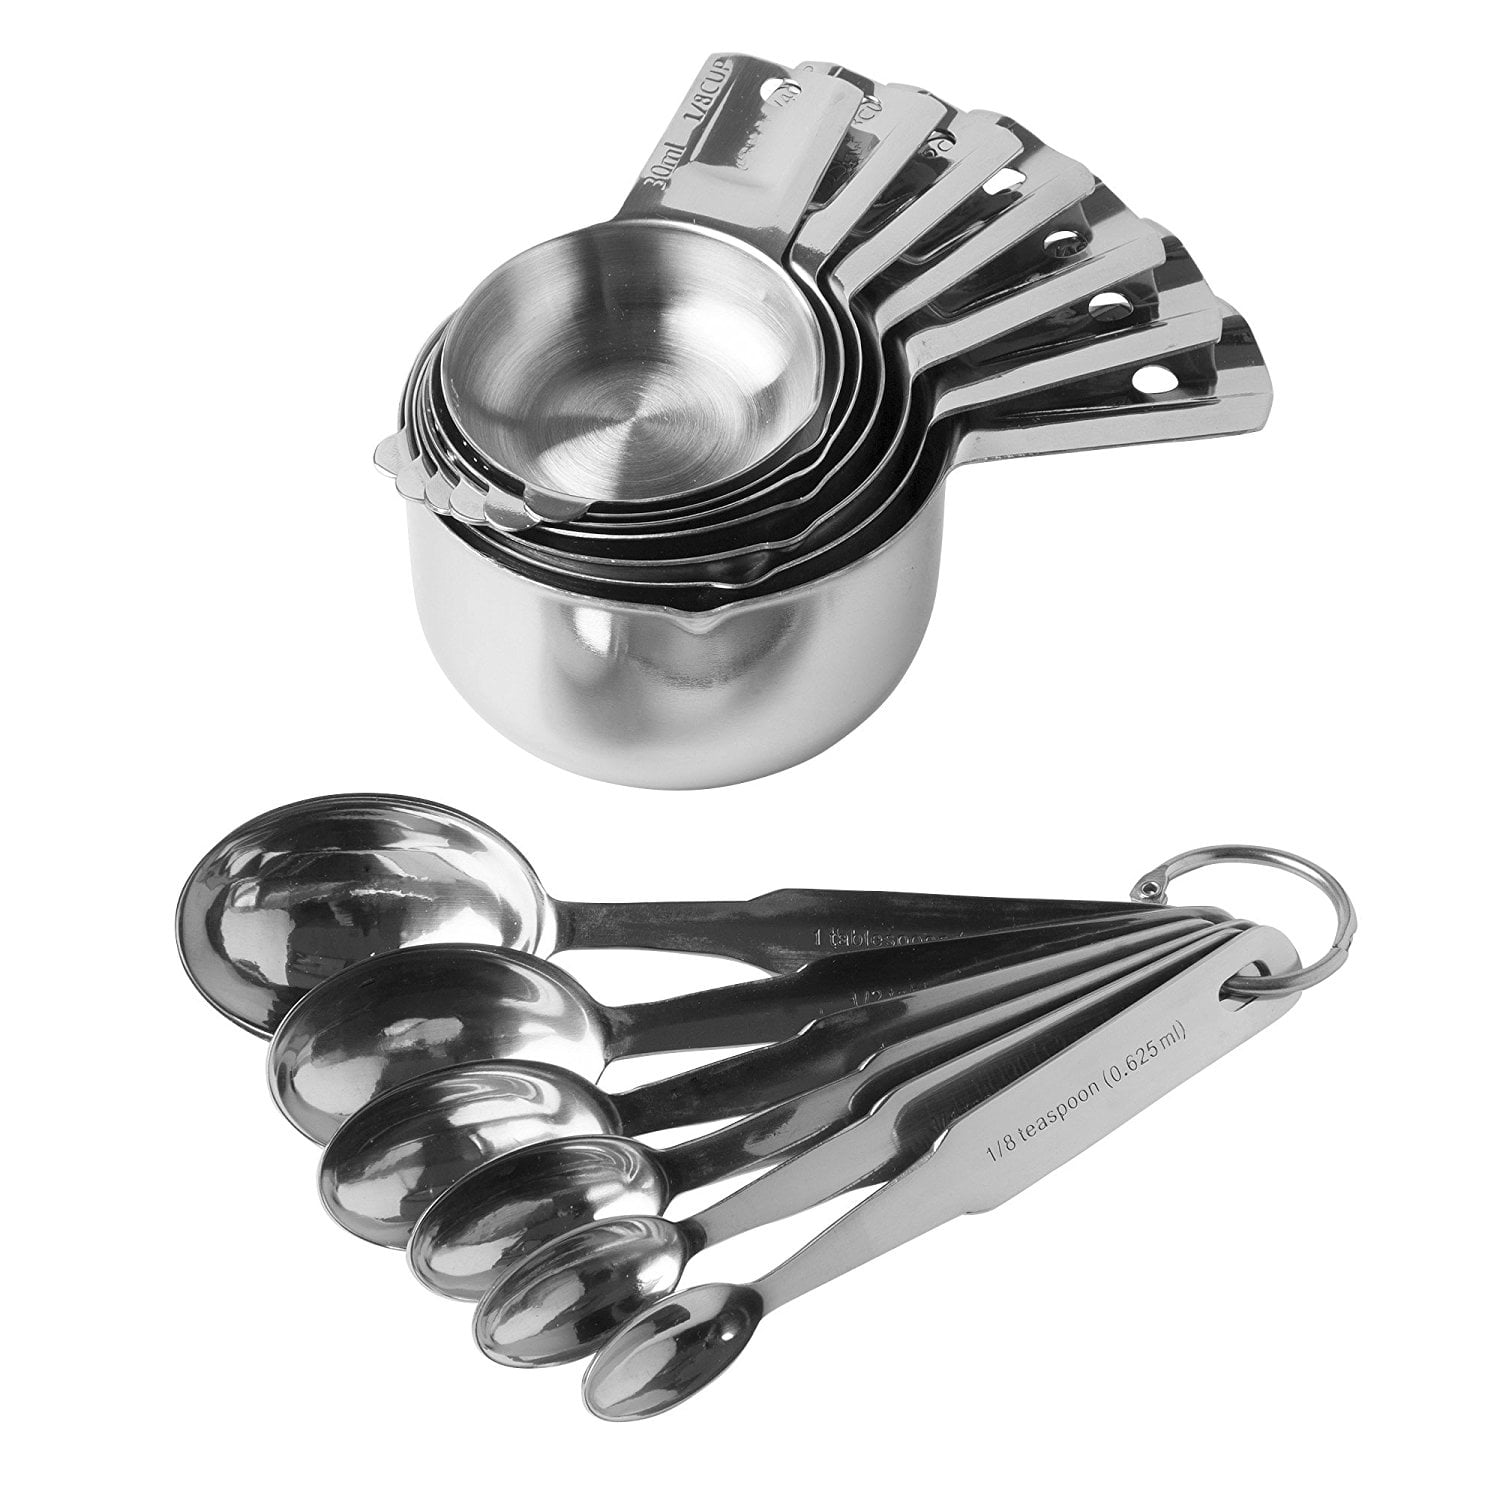 measuring-cups-and-spoons-13-piece-complete-set-of-quality-professional-grade-18-8-stainless